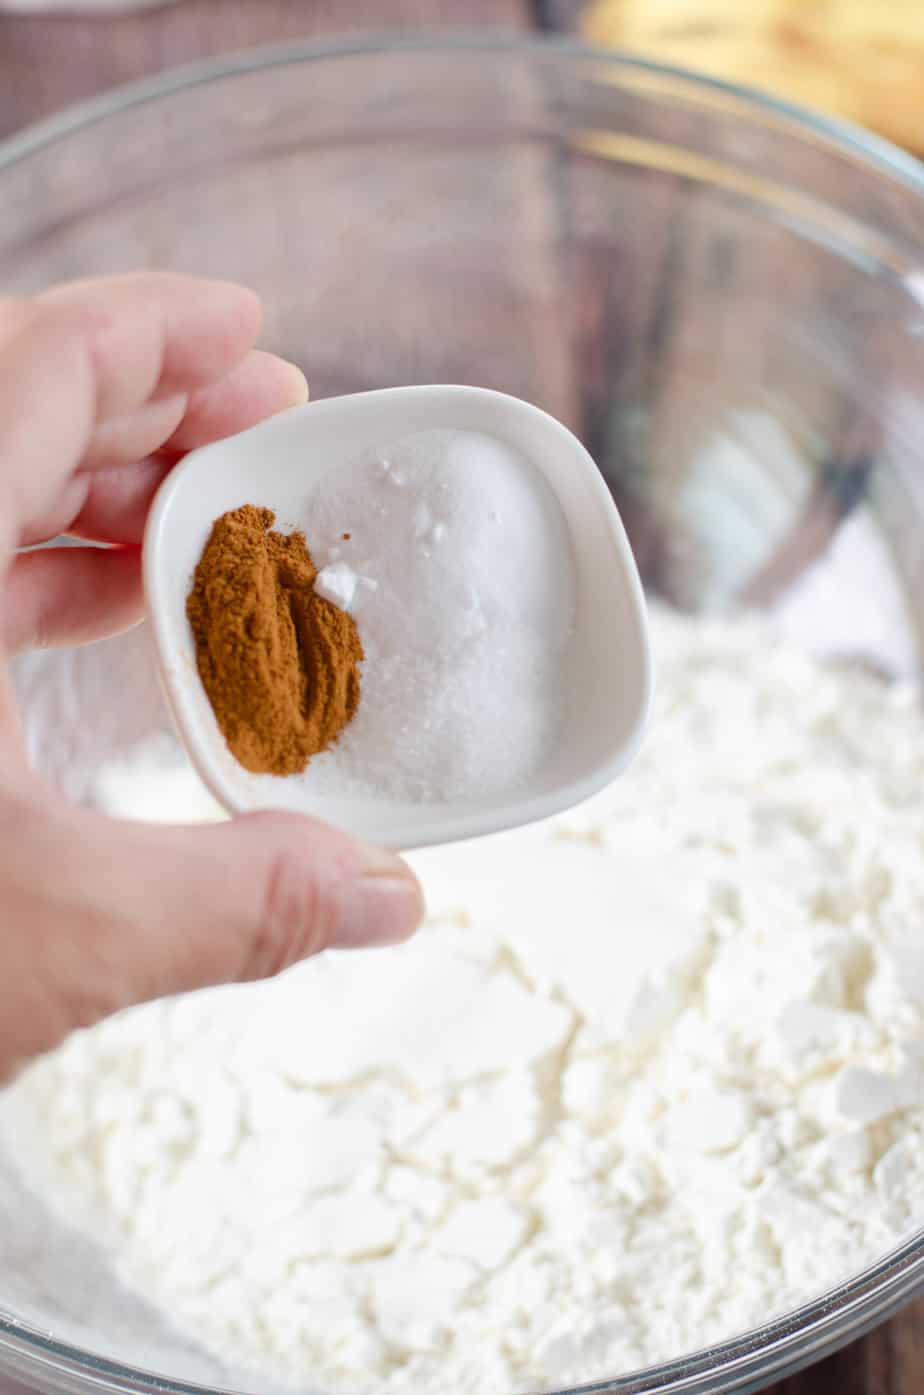 cinnamon, salt and baking soda being added to a bowl of flour